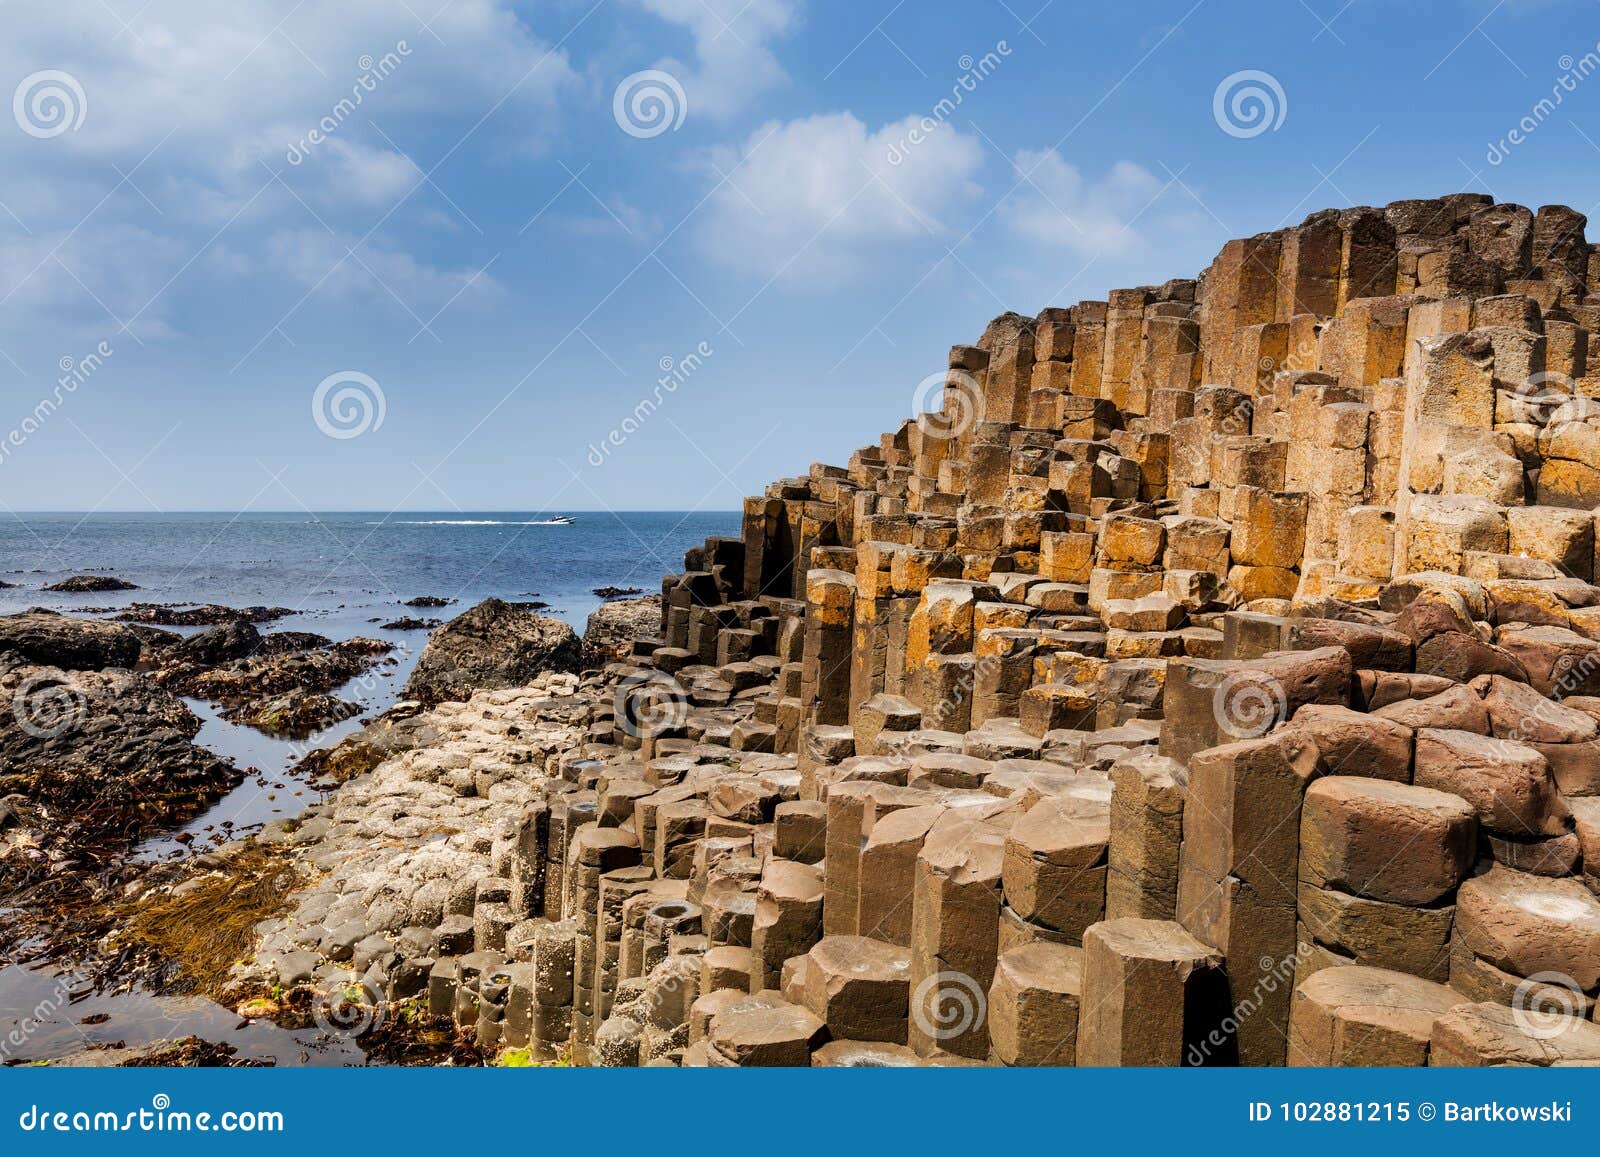 the giants causeway in county antrim of northern ireland